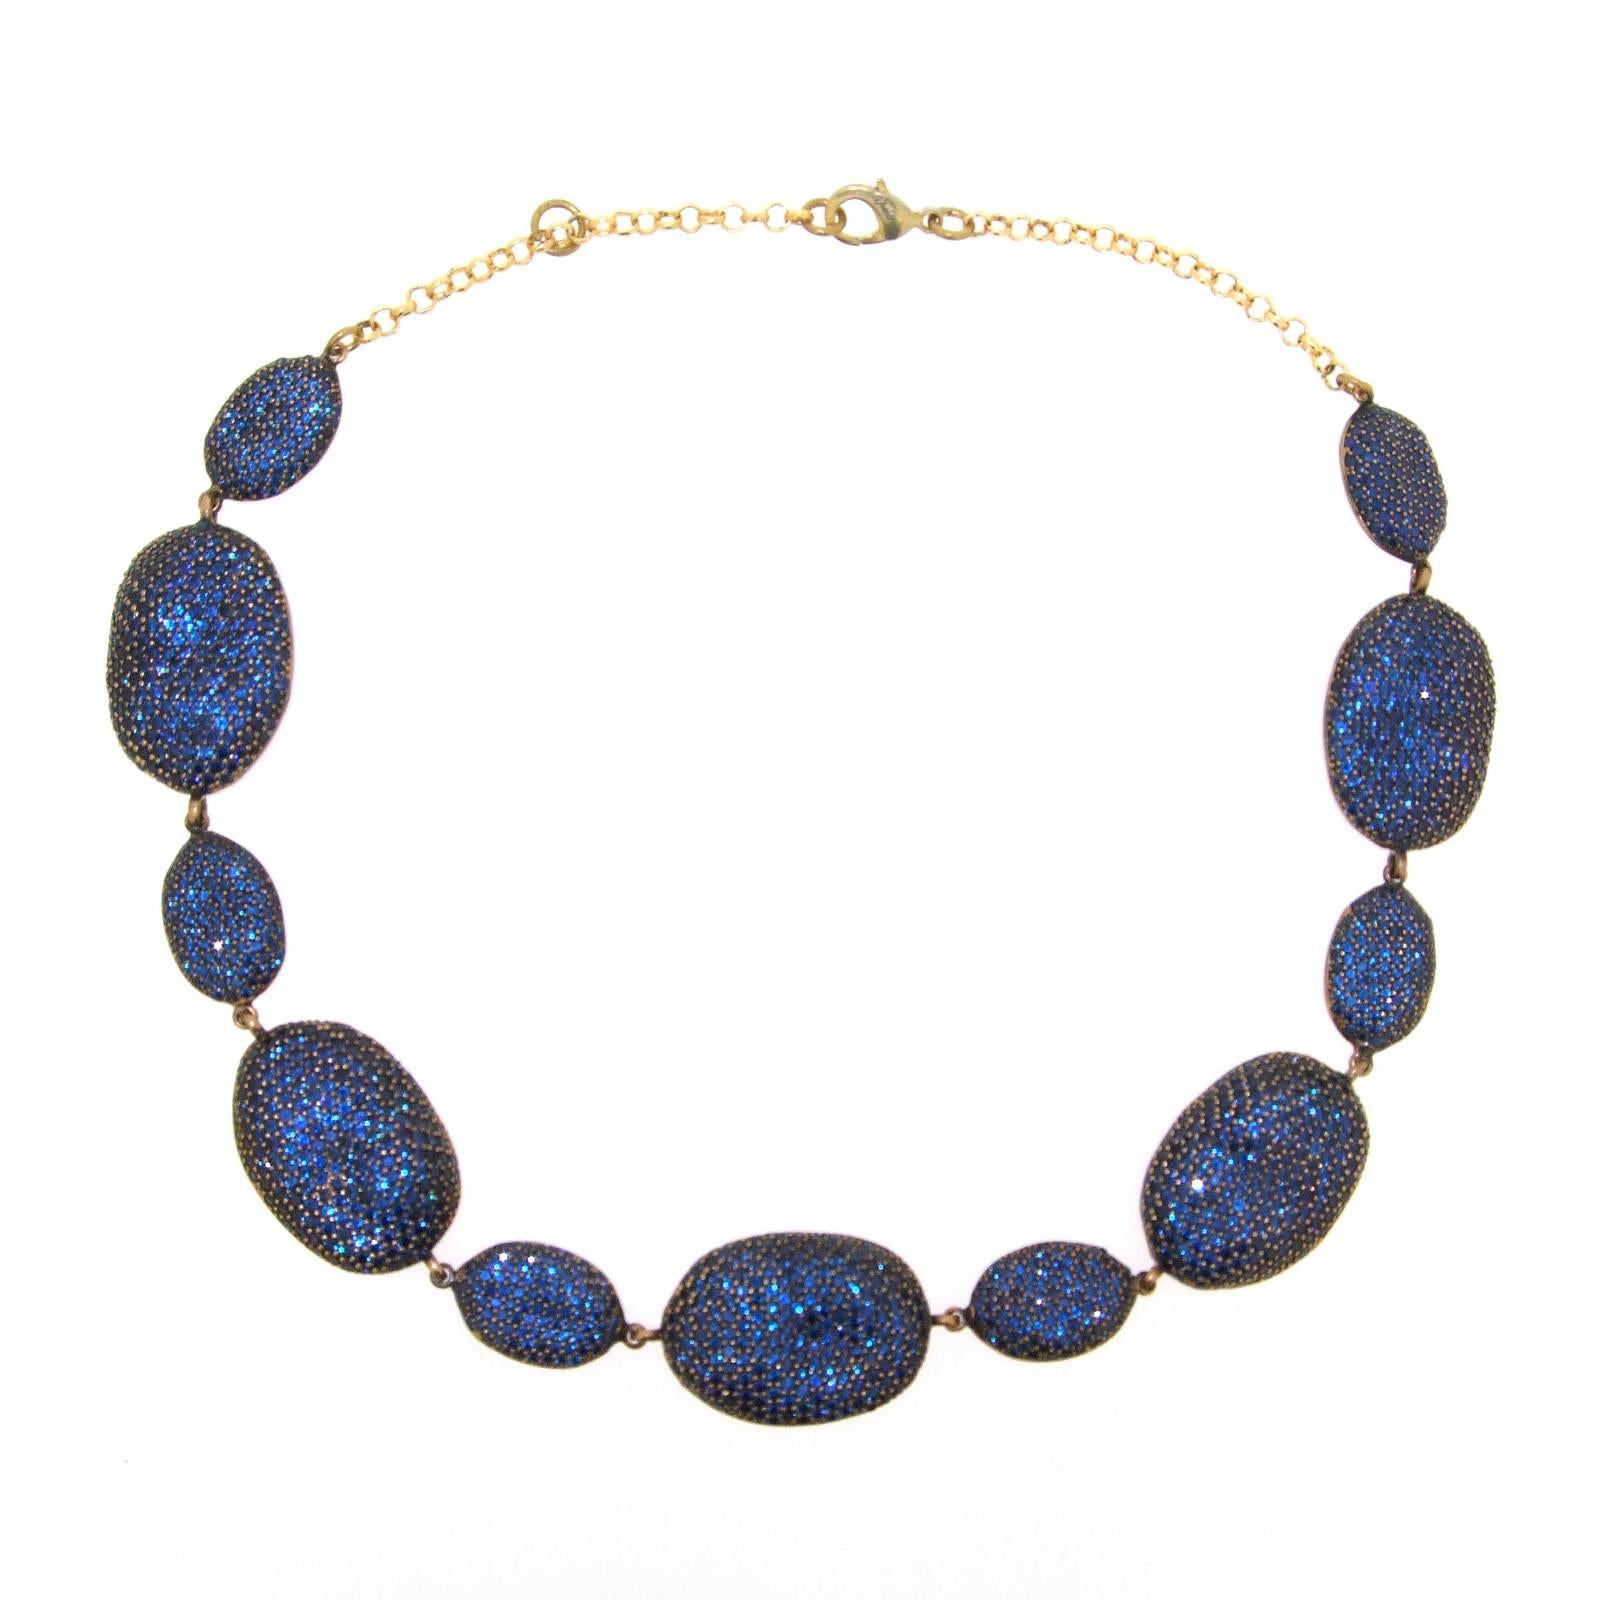 A stunning necklace by JCM London. Each pebble is encrusted with blue Iolite (a semi-precious stone in the sapphire family), they have a natural undulating uneven formation to give it the feel of the shape of a natural pebble. 

The smaller ovals